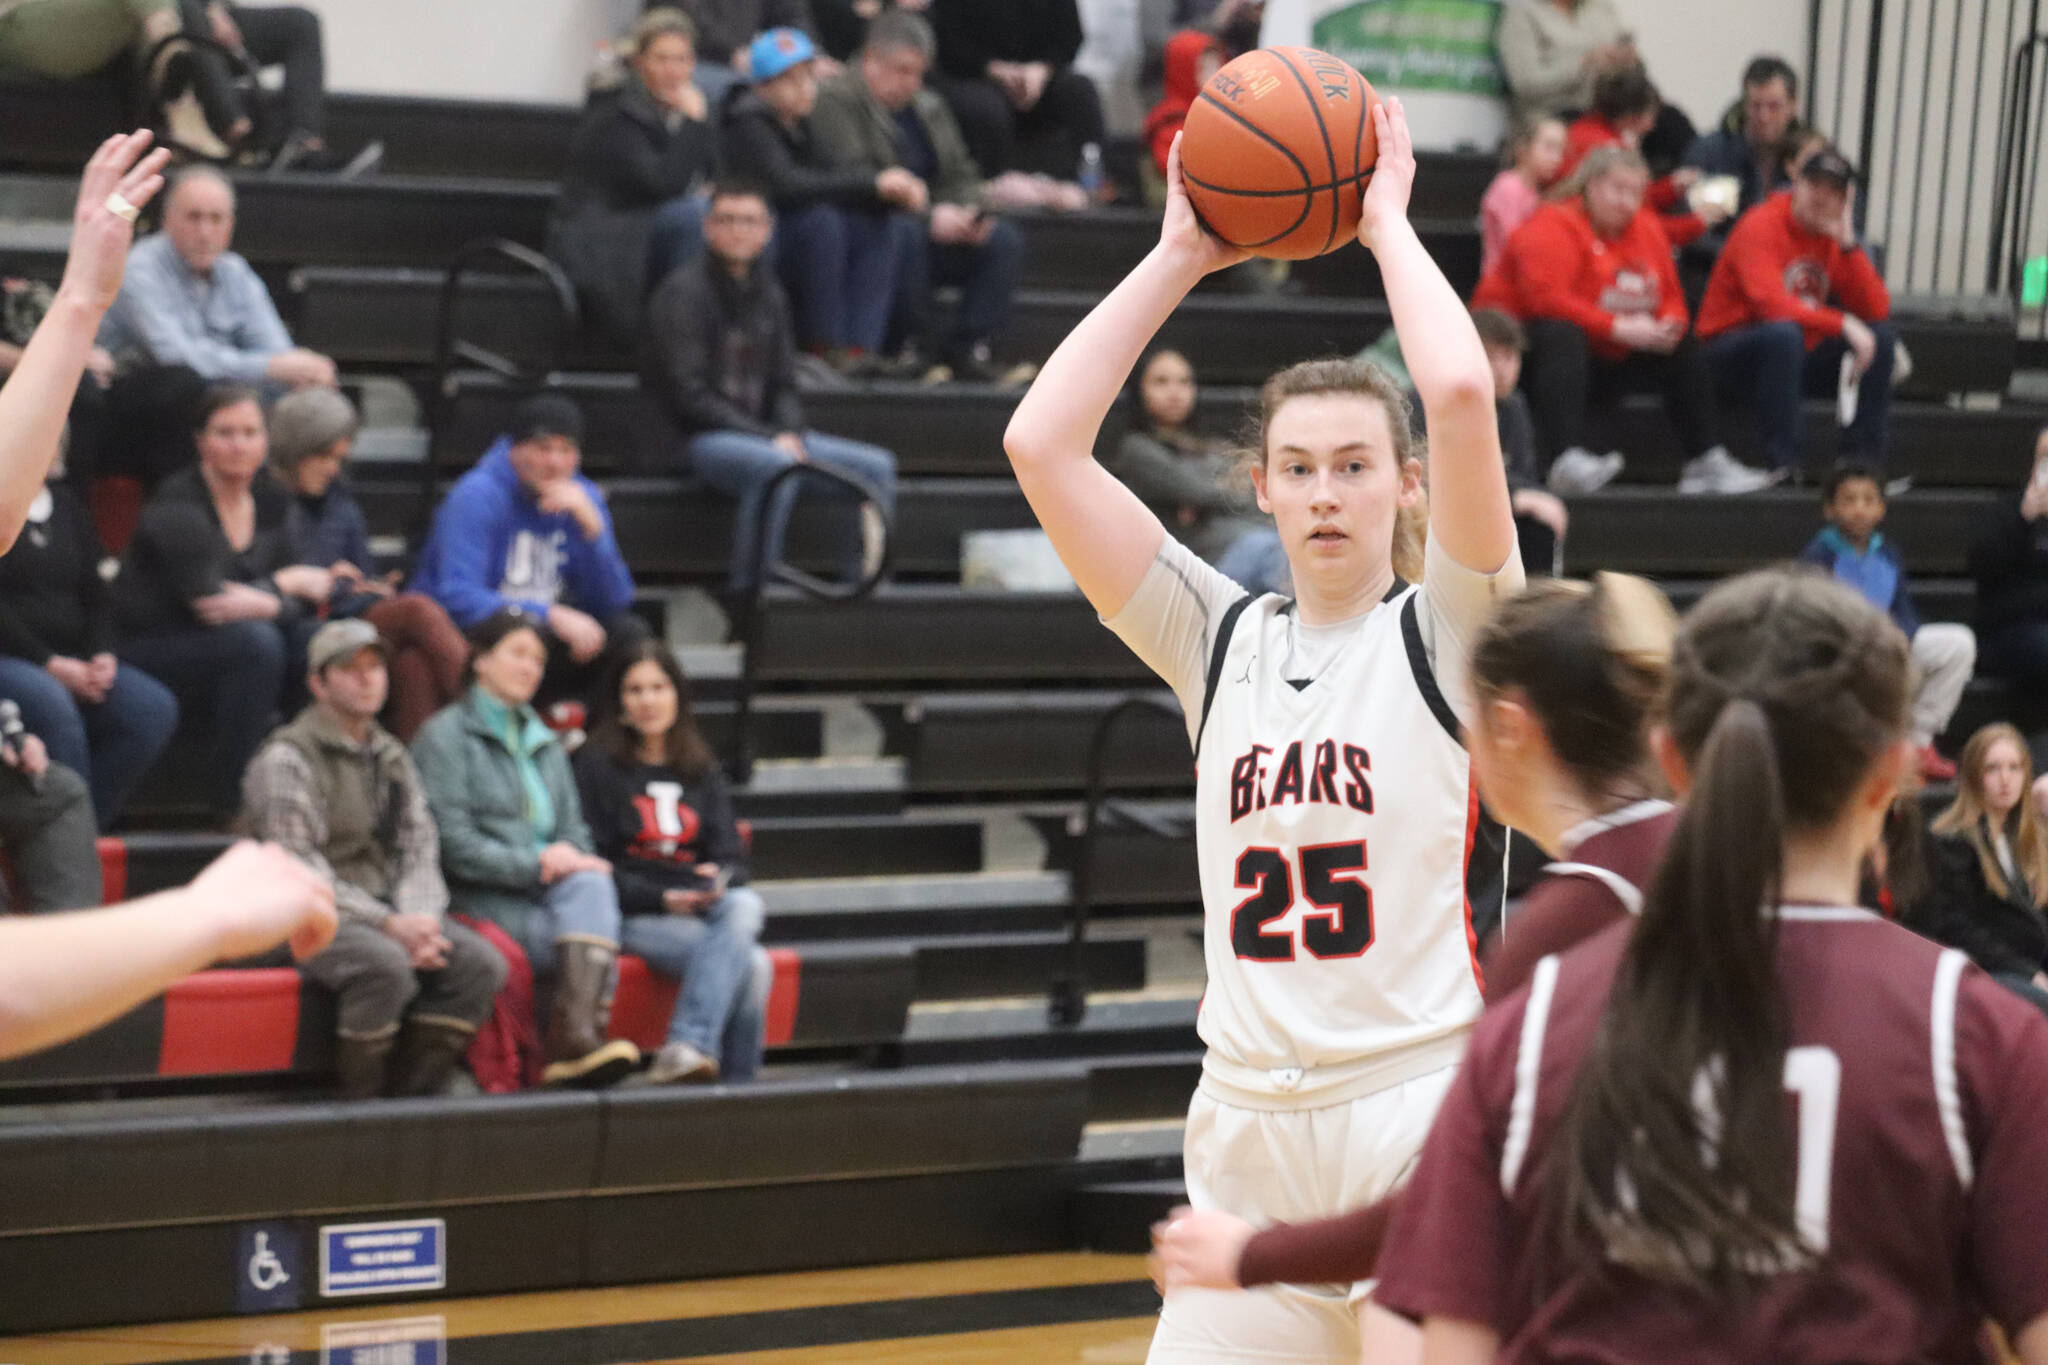 JDHS senior Ashley Laudert, who scored 4 points on Friday and 9 on Saturday against Ketchikan High School, looks for an open pass during Friday’s home conference game facing the Lady Knights. (Jonson Kuhn / Juneau Empire)